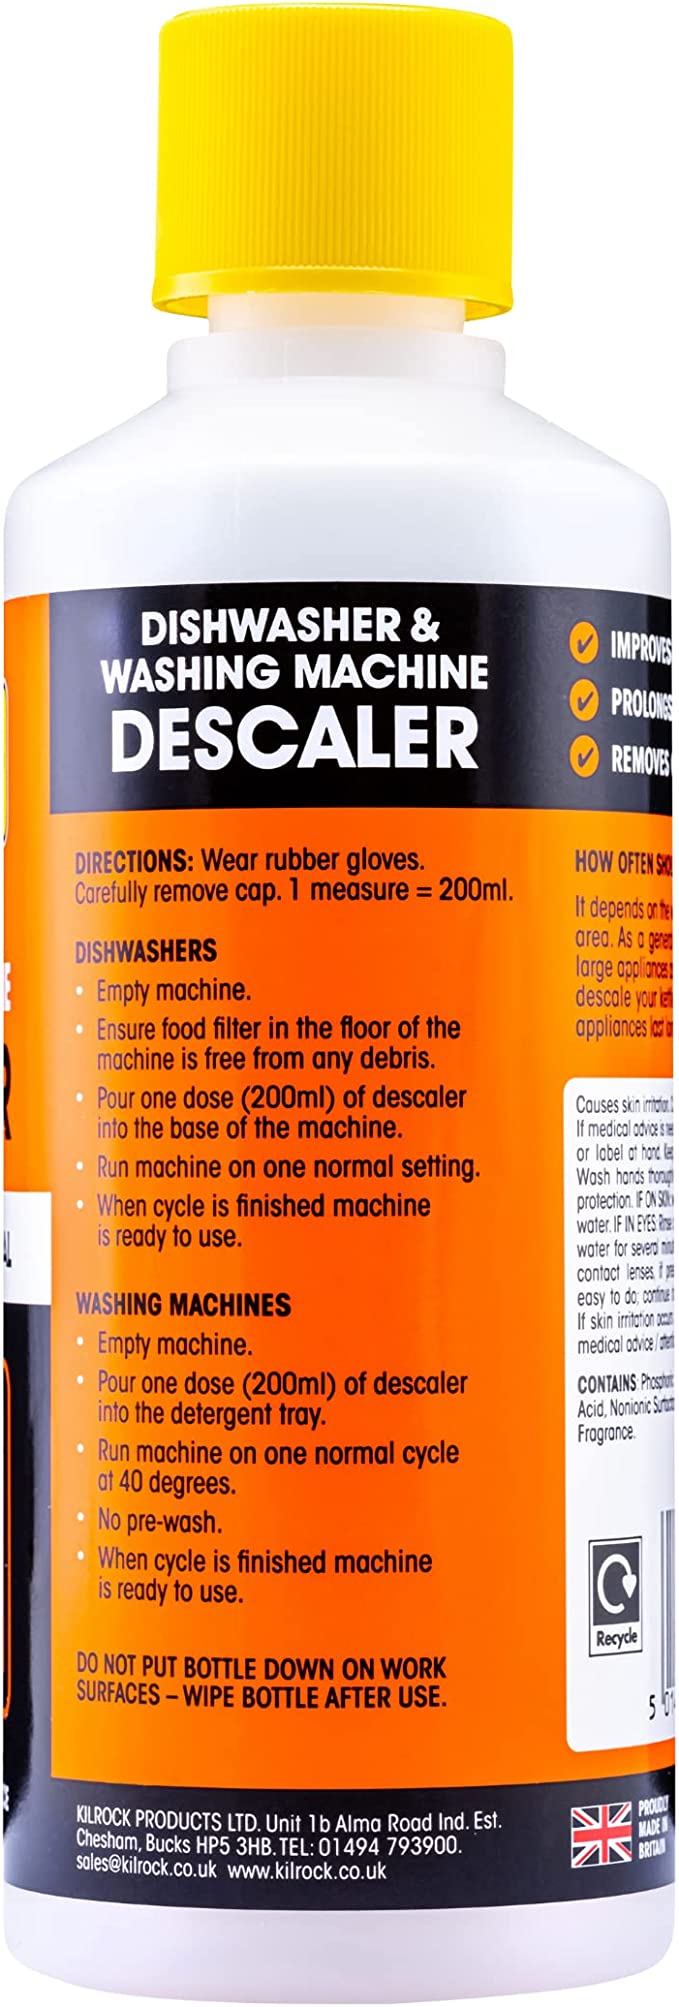 Kilrock - Big W Descaler 400 millilitres - Dishwasher and Washing Machine Cleaner for Limescale & Odours